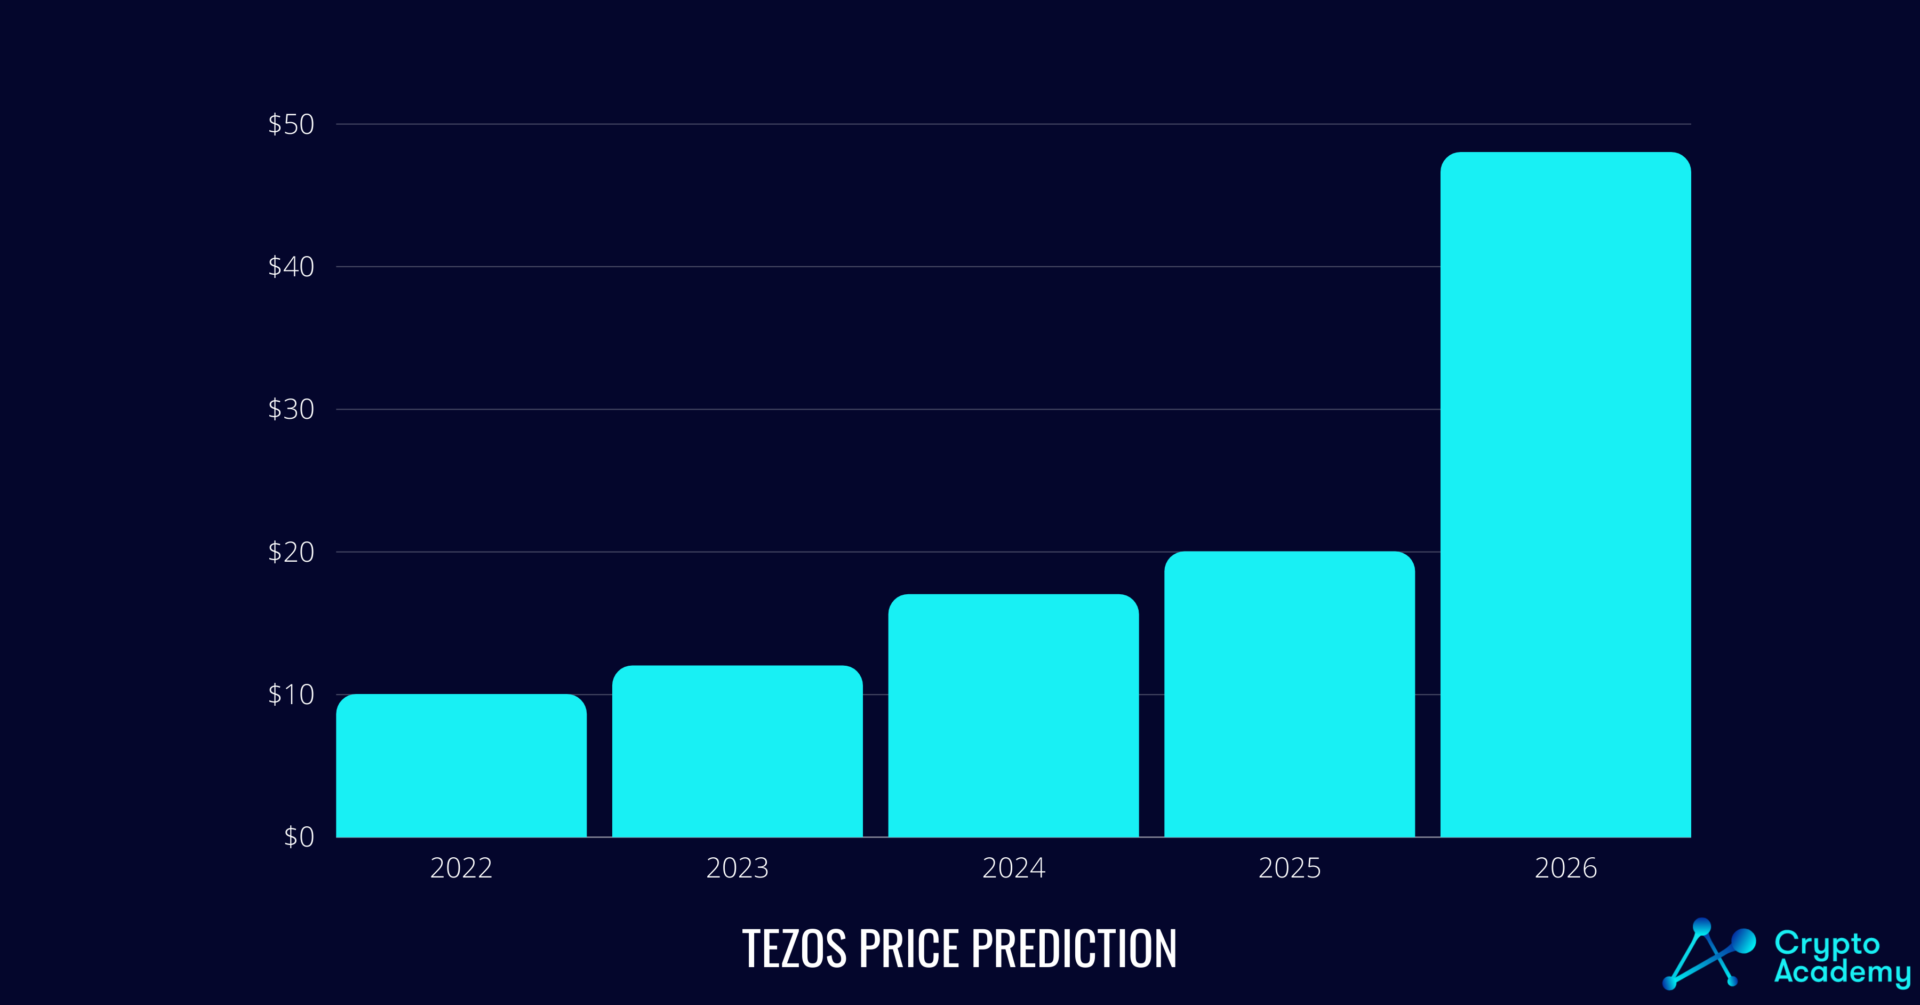 Tezos (XTZ) price prediction for the next five years